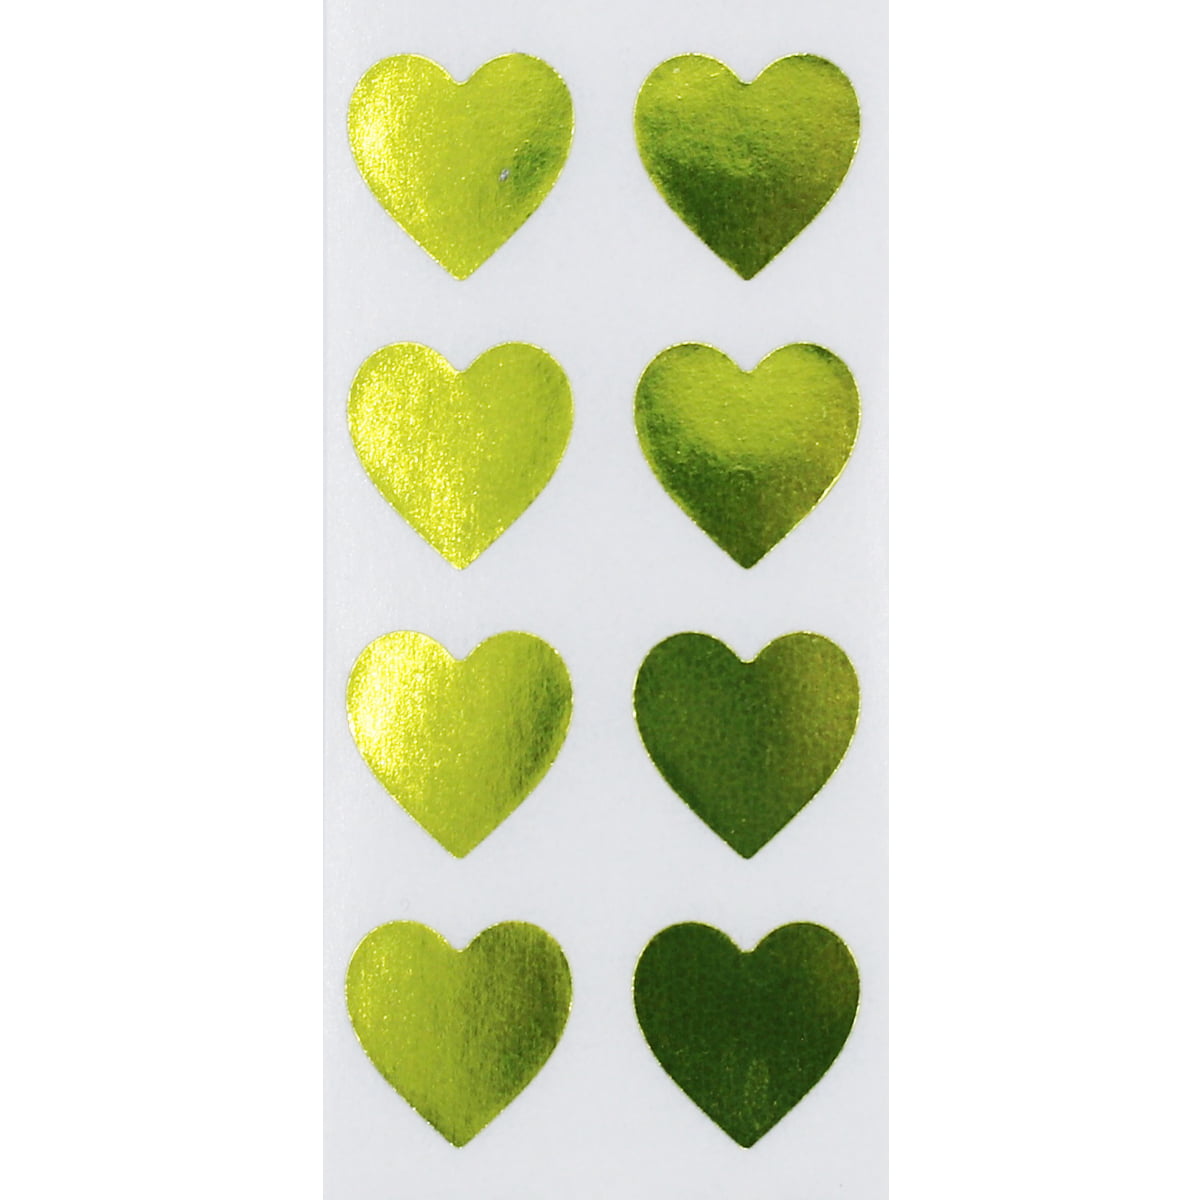 COLOR Love Heart WG335 Sticker – Oh Snap! Beauty Supply